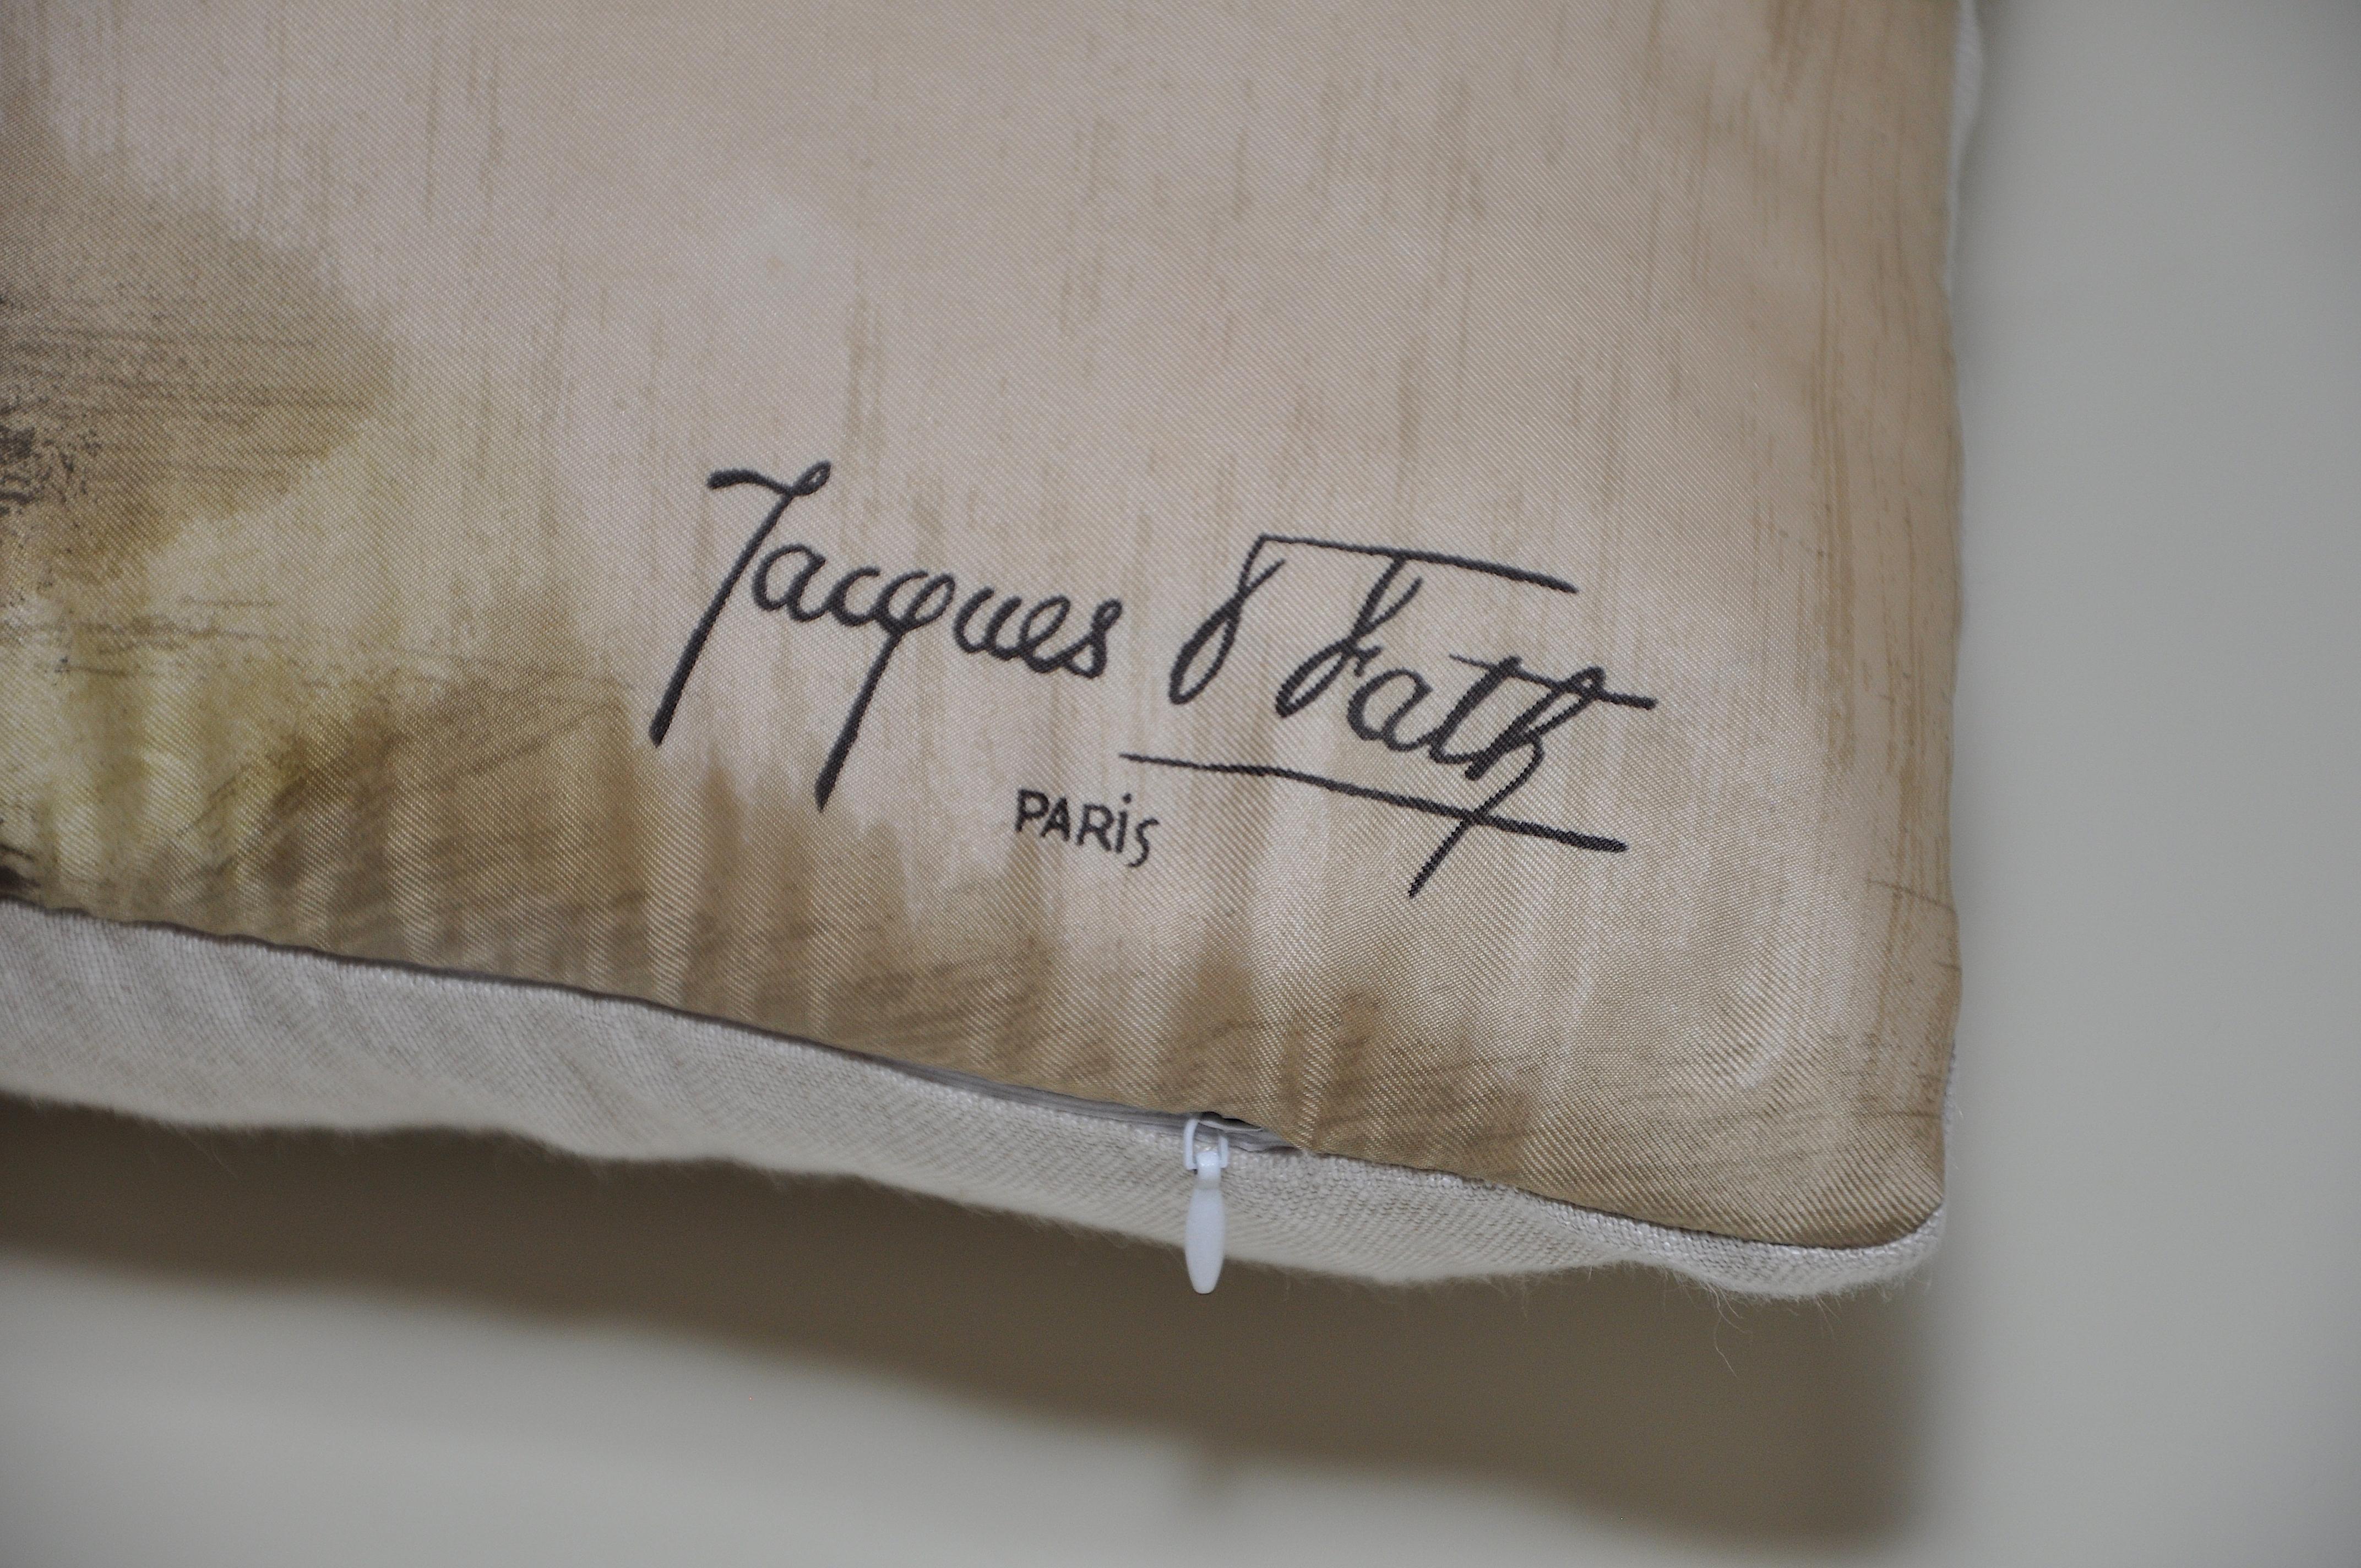 Large vintage Jacques Fath French silk fabric with Irish linen cushion pillow.

This cushion is a one-of-a-kind and part of a sustainability project.
It has been created from an up-cycled, recycled luxury fabric, used with the intentions of